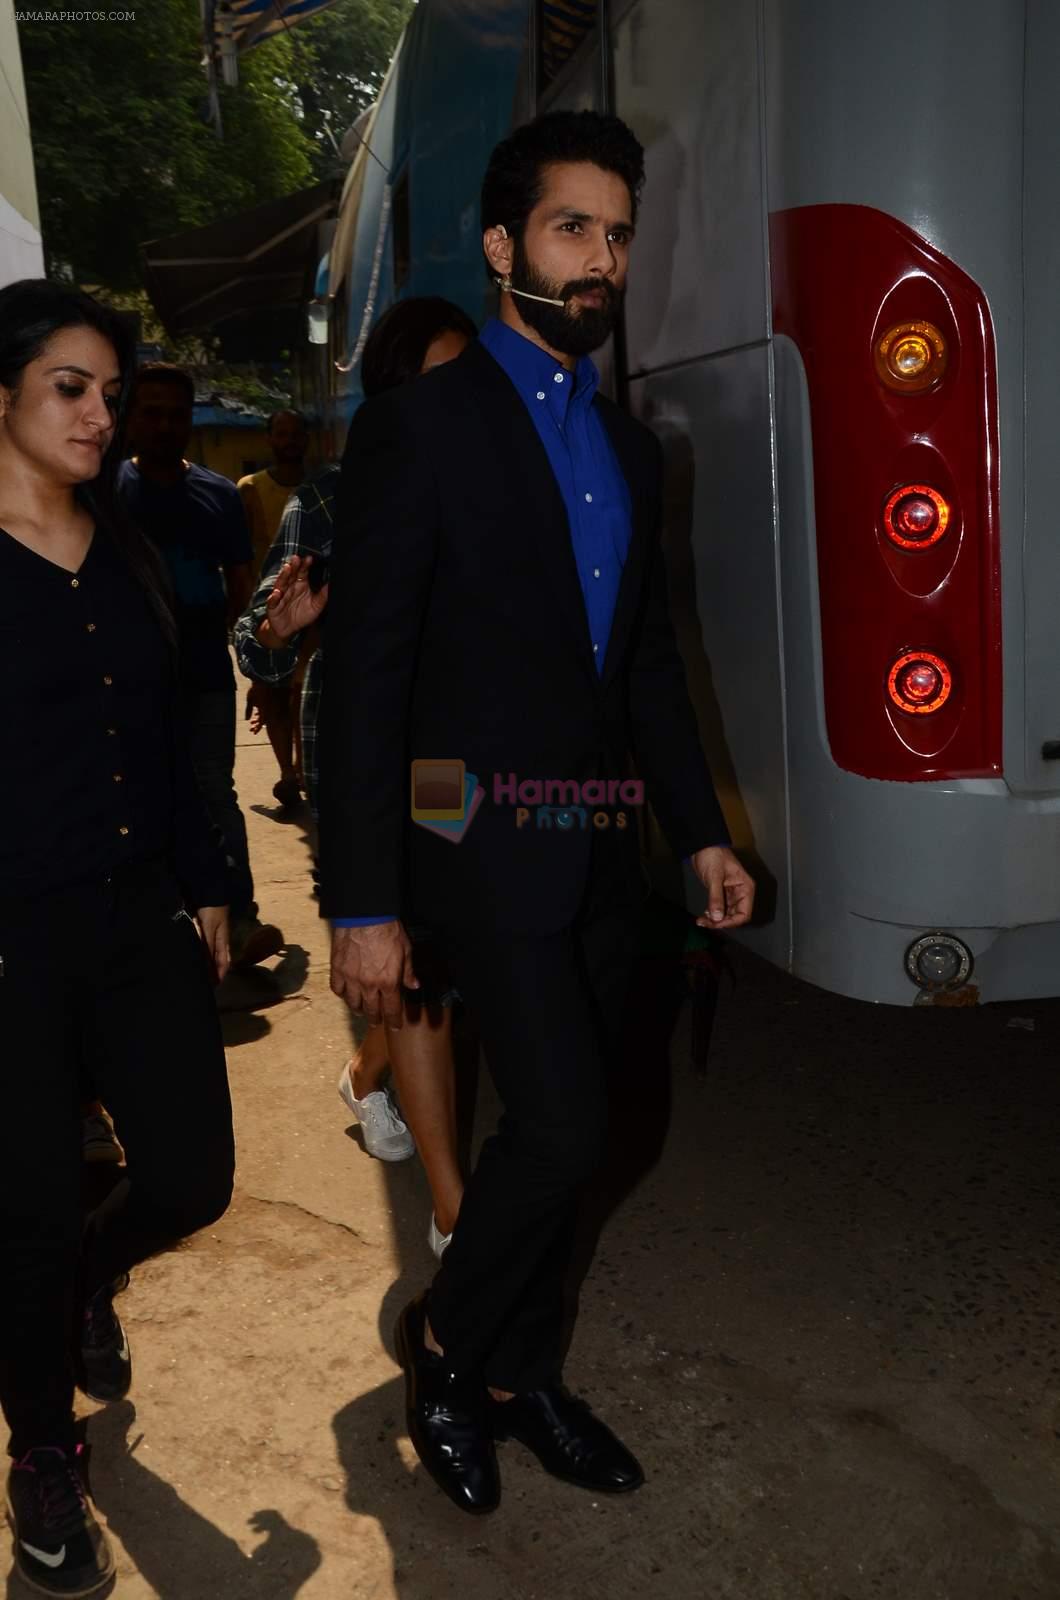 Shahid Kapoor at Jhalak dikhhla jaa reloaded grand finale shoot in Filmistan on 7th Oct 2015